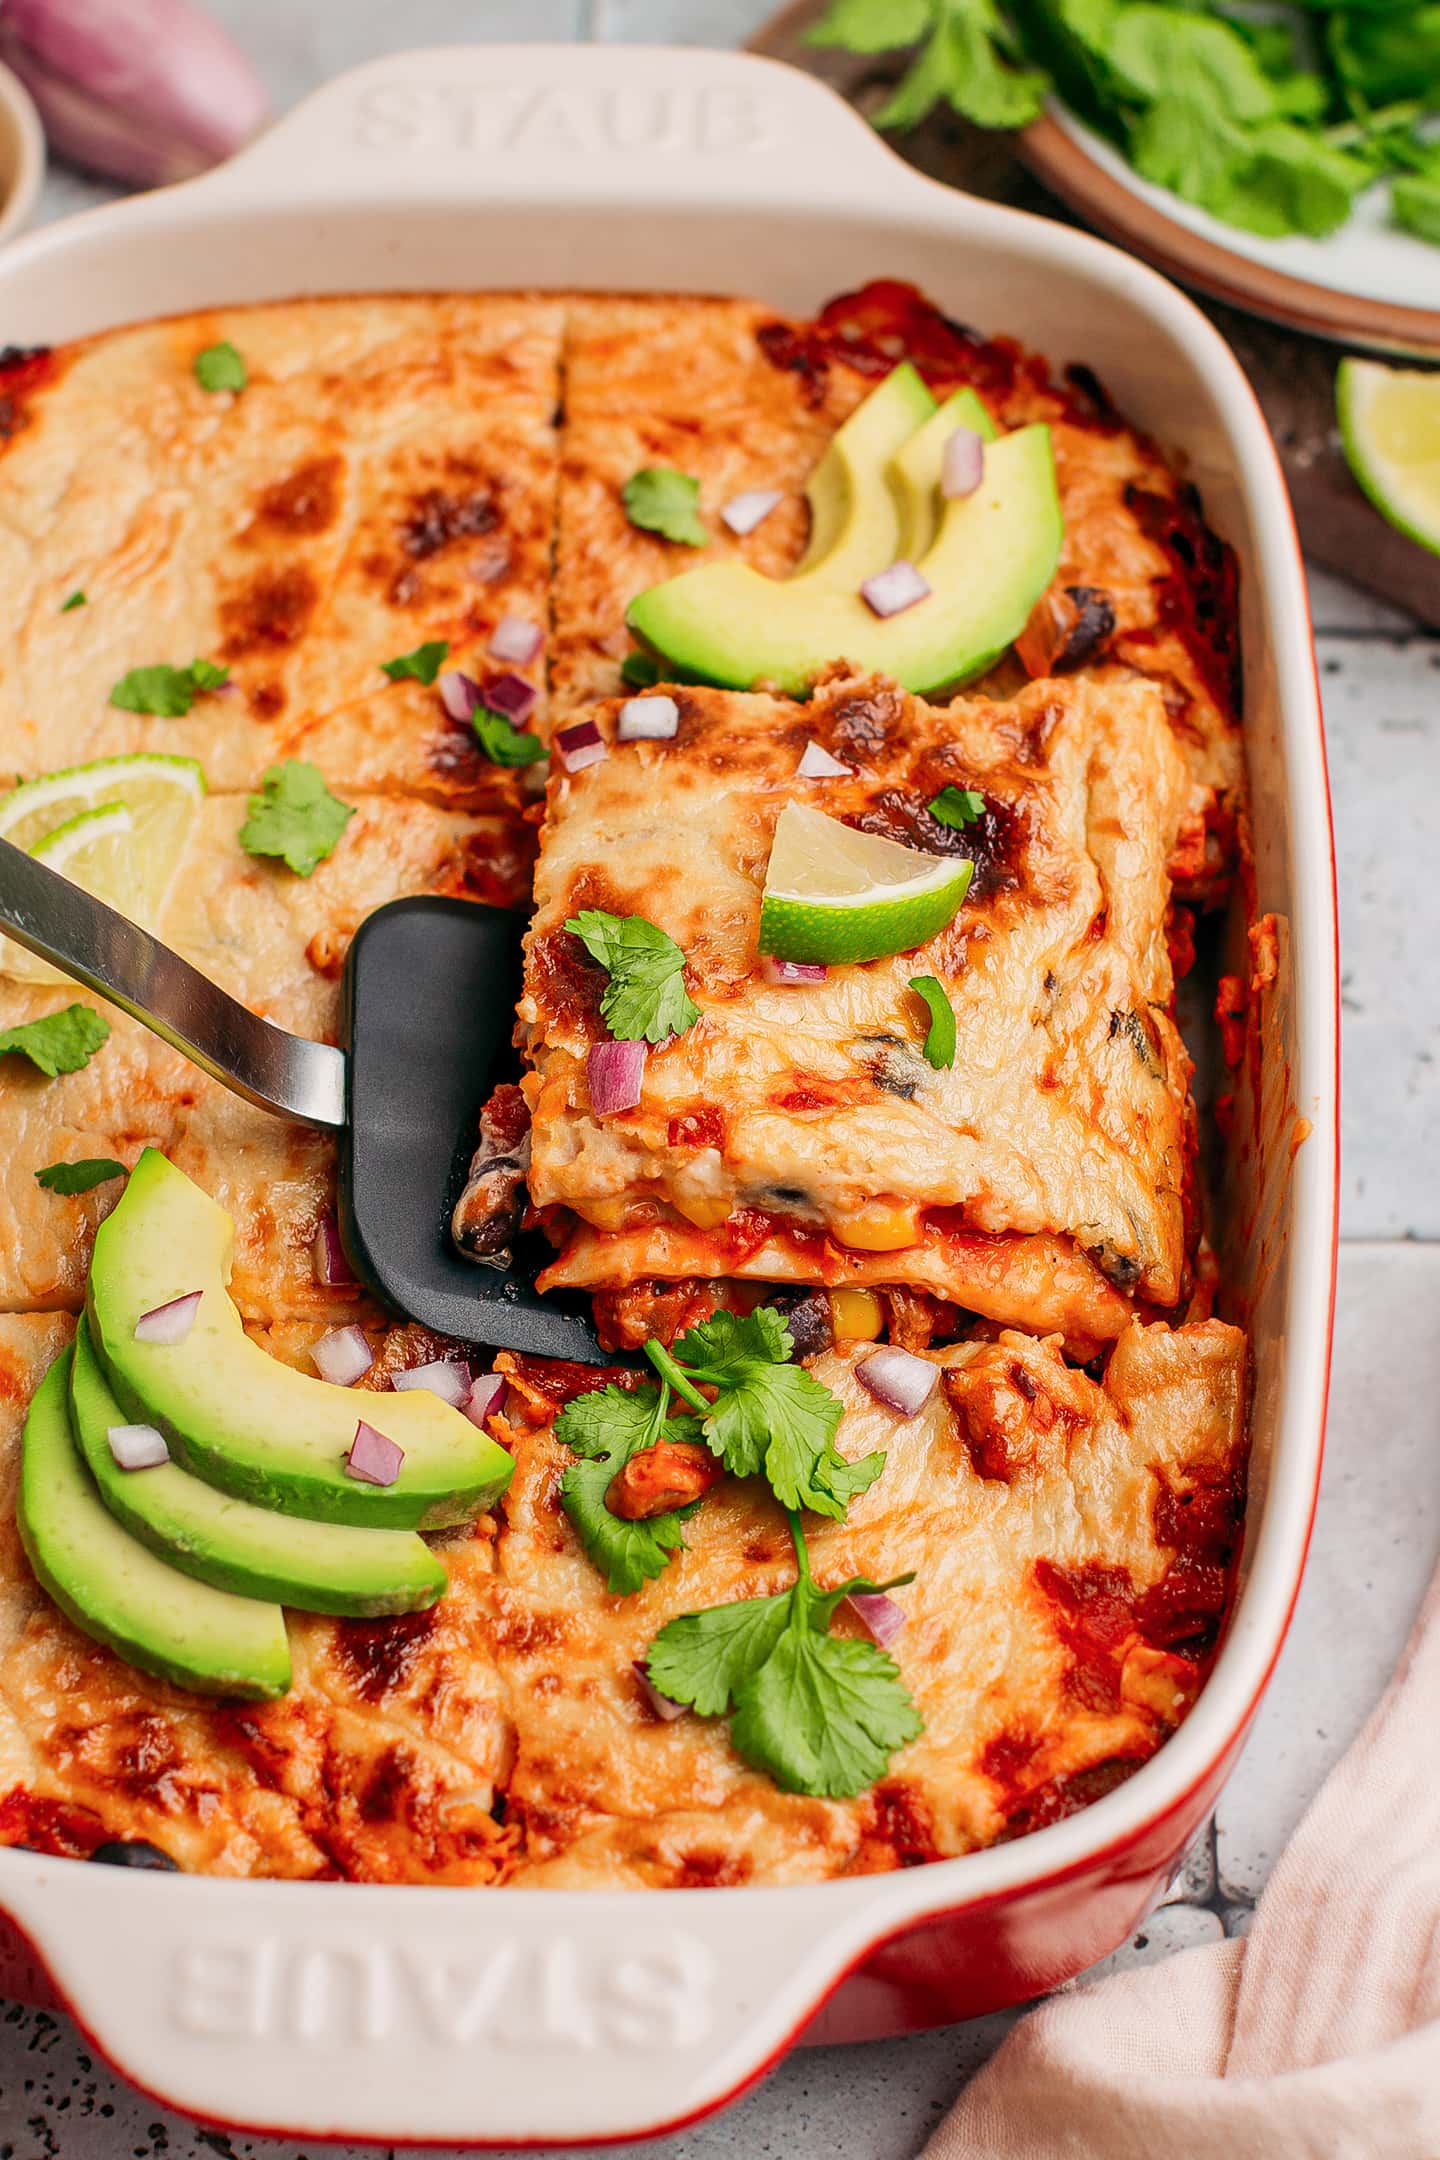 Serving of enchilada casserole in a baking dish.